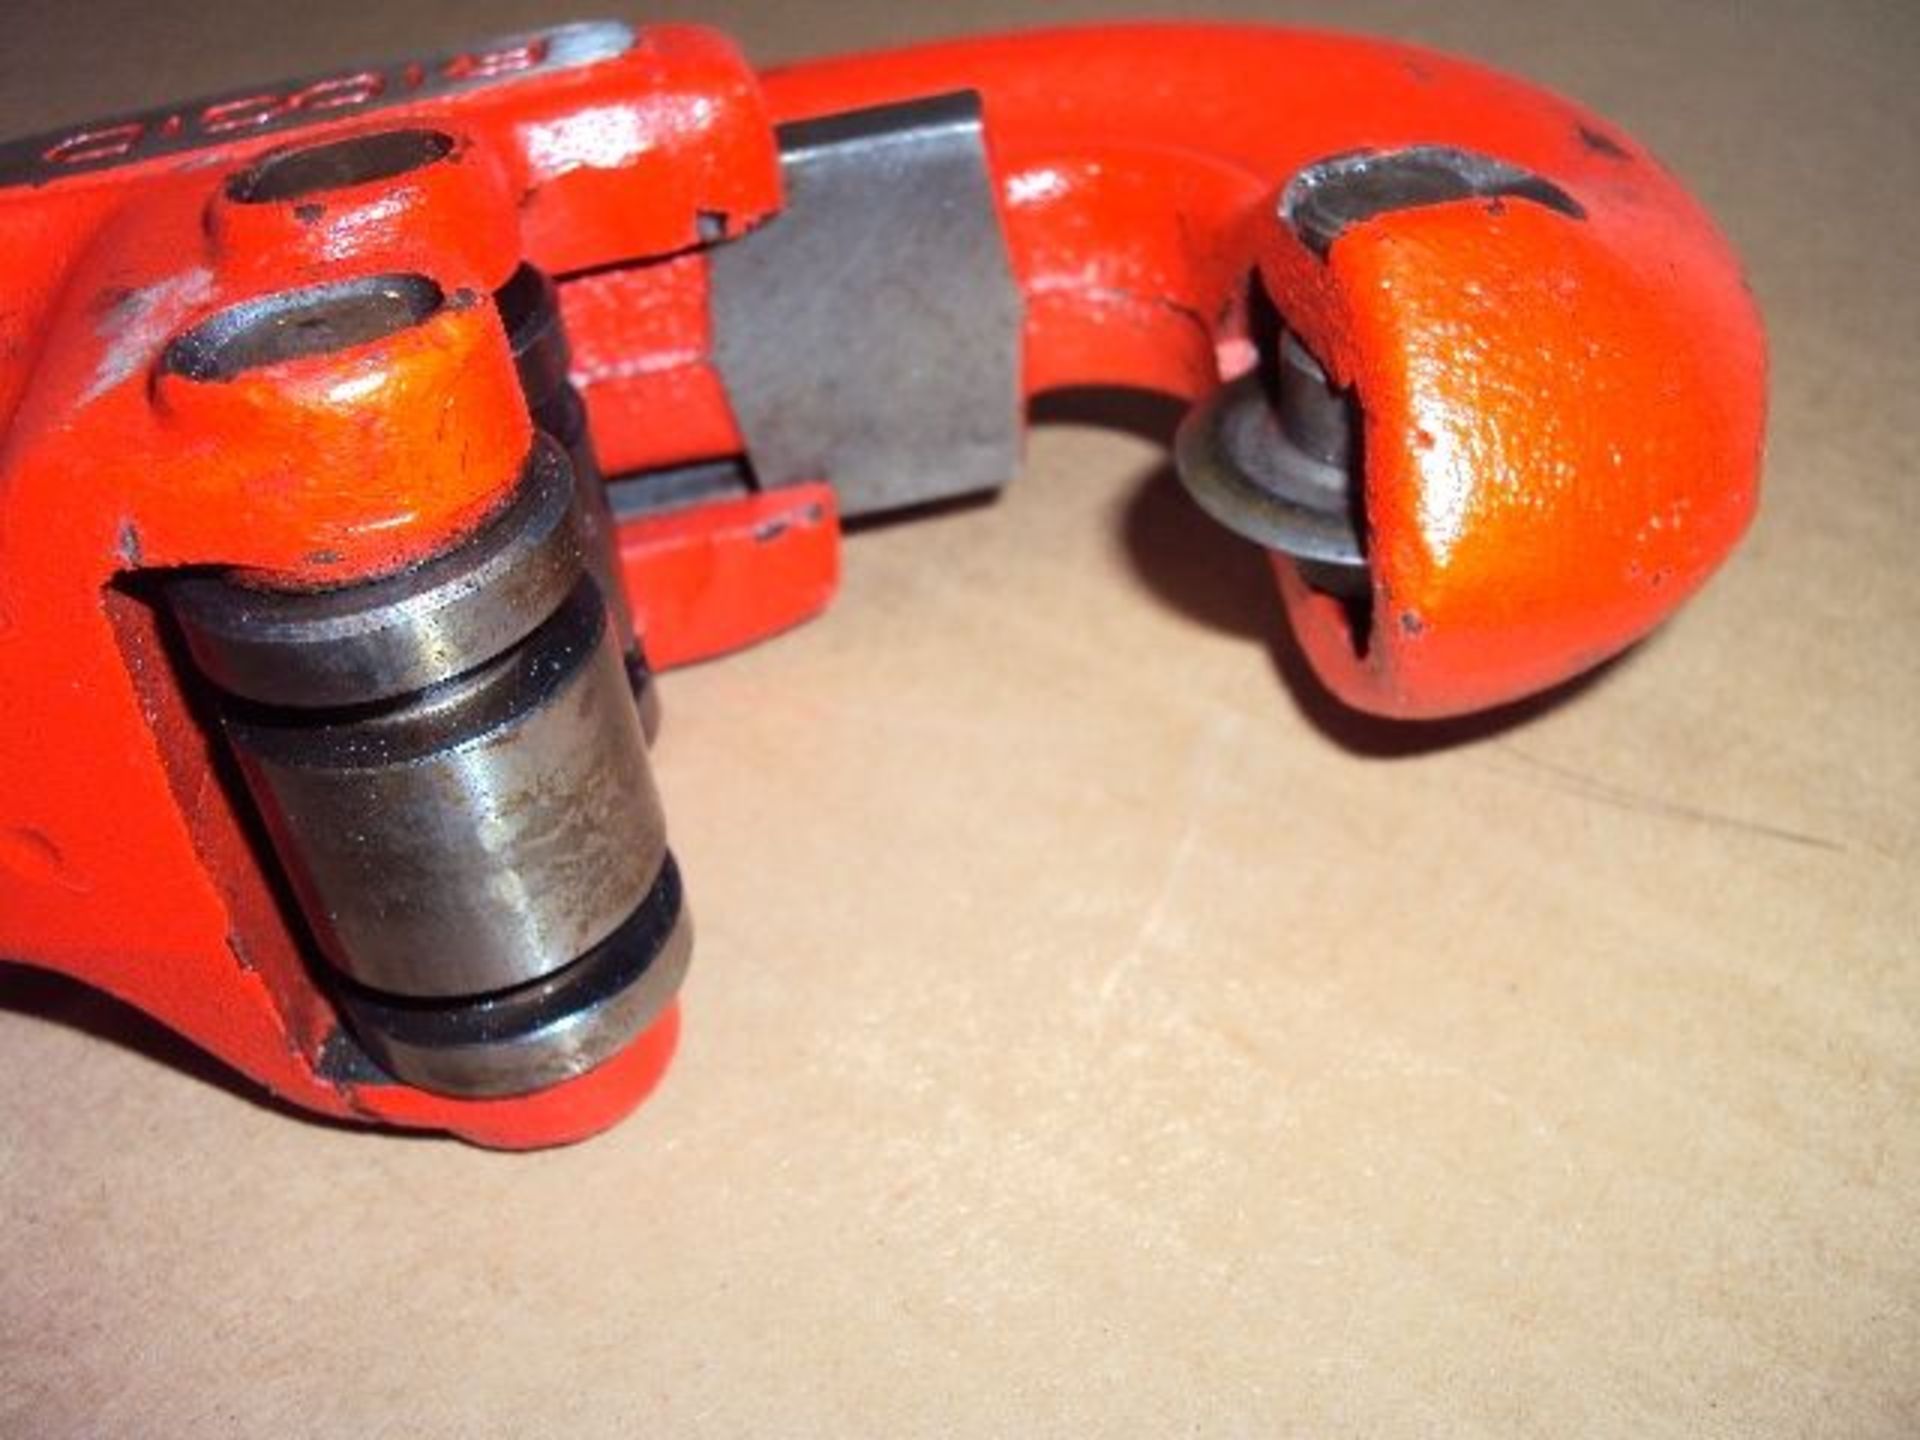 Ridgid No. 202 1/8” to 2” Pipe Cutter /256 - Image 2 of 3